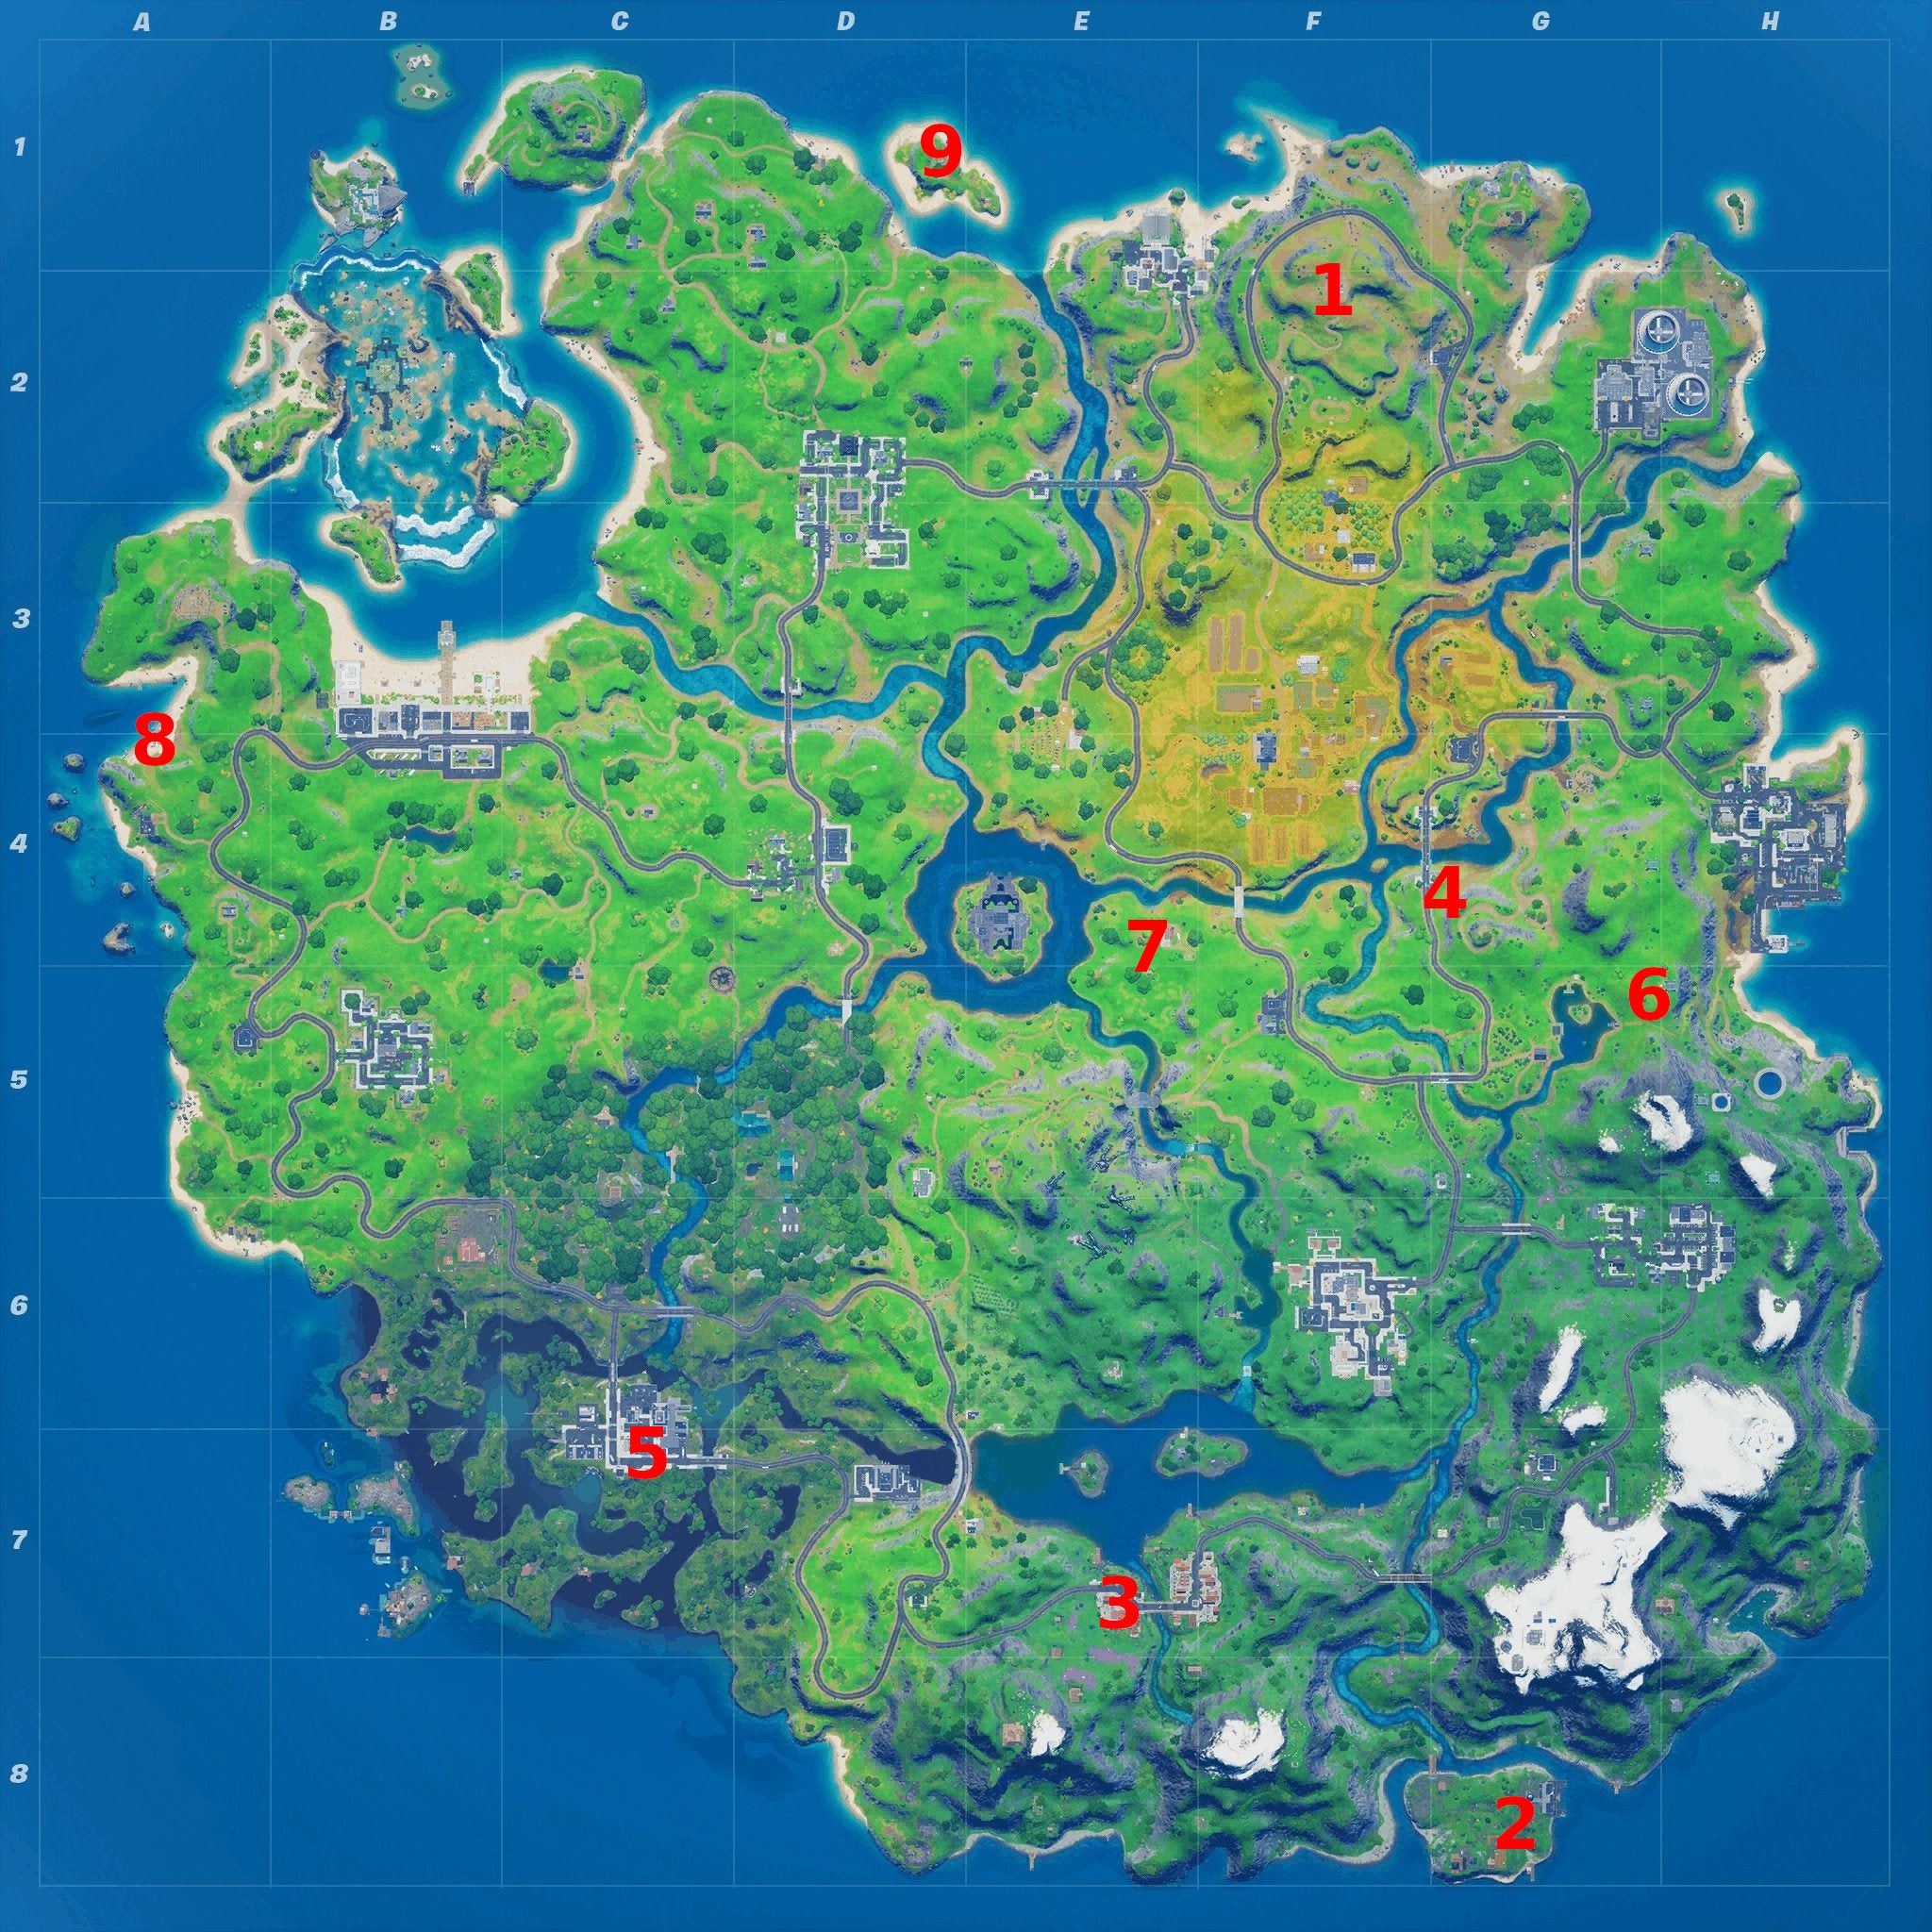 Fortnite Week 5 XP coins: All XP coin locations on the Fortnite map- Republic World